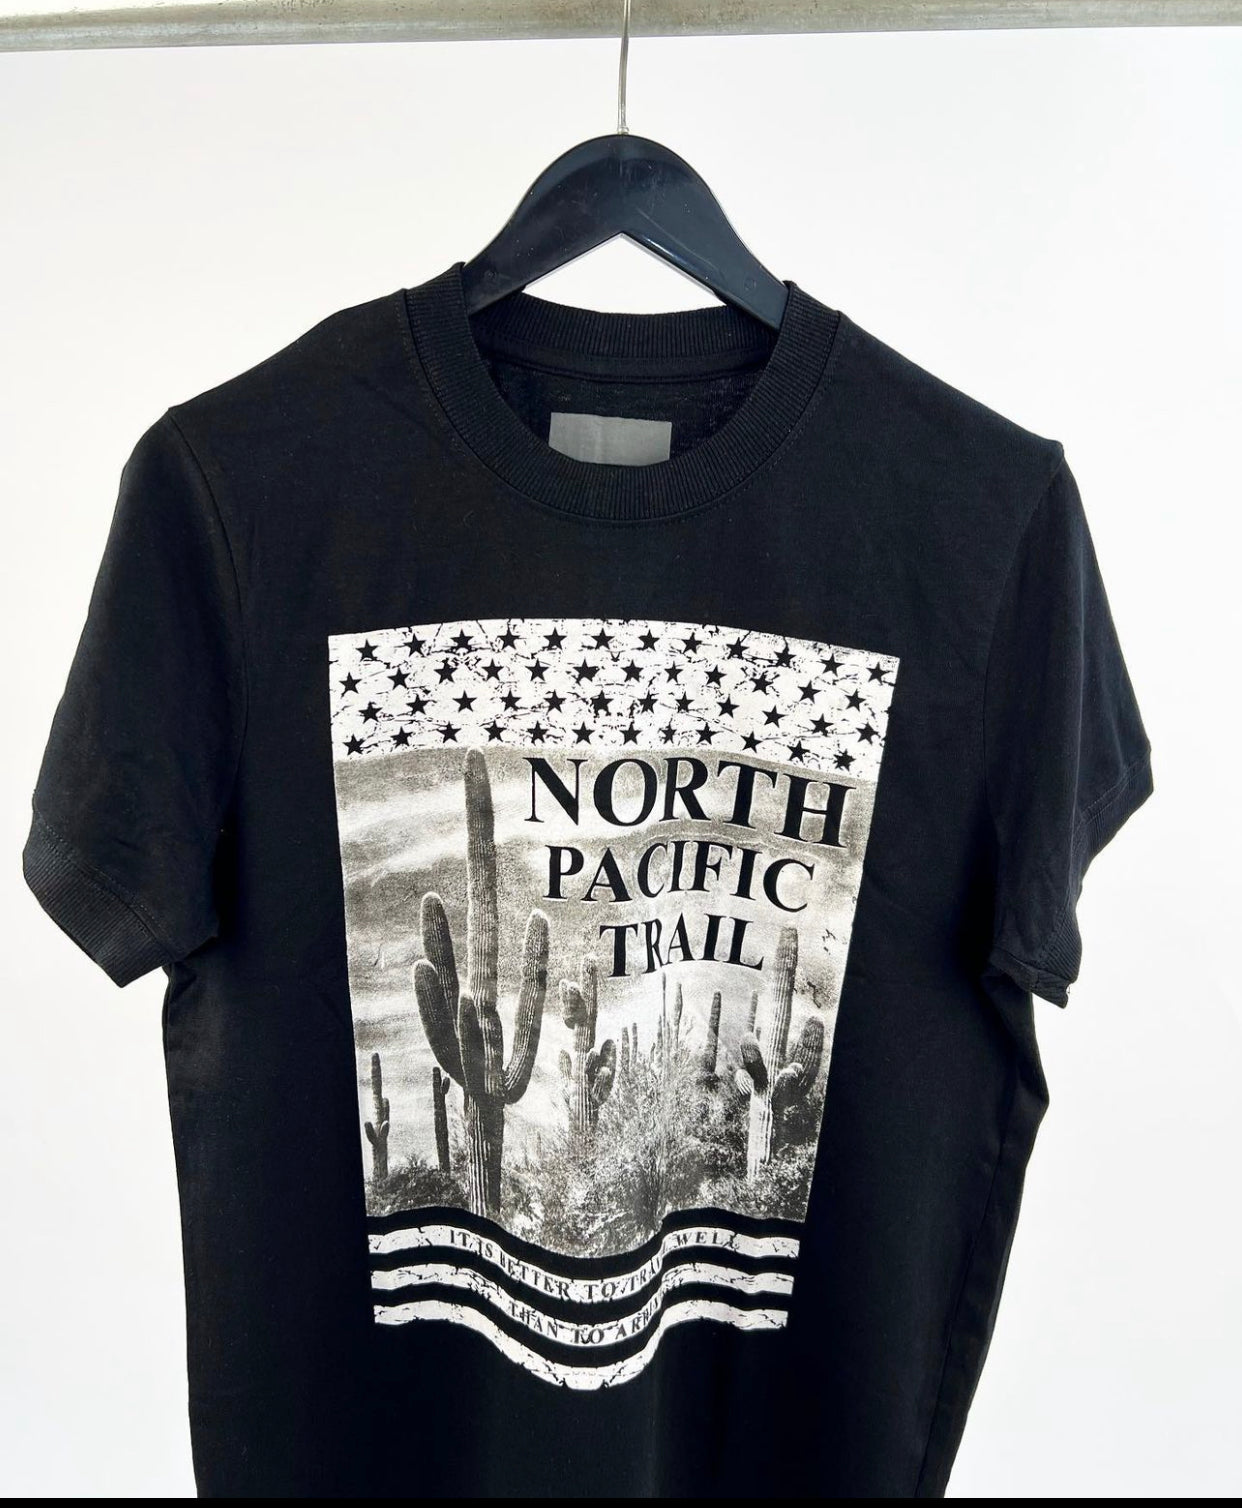 North Pacific trail tee